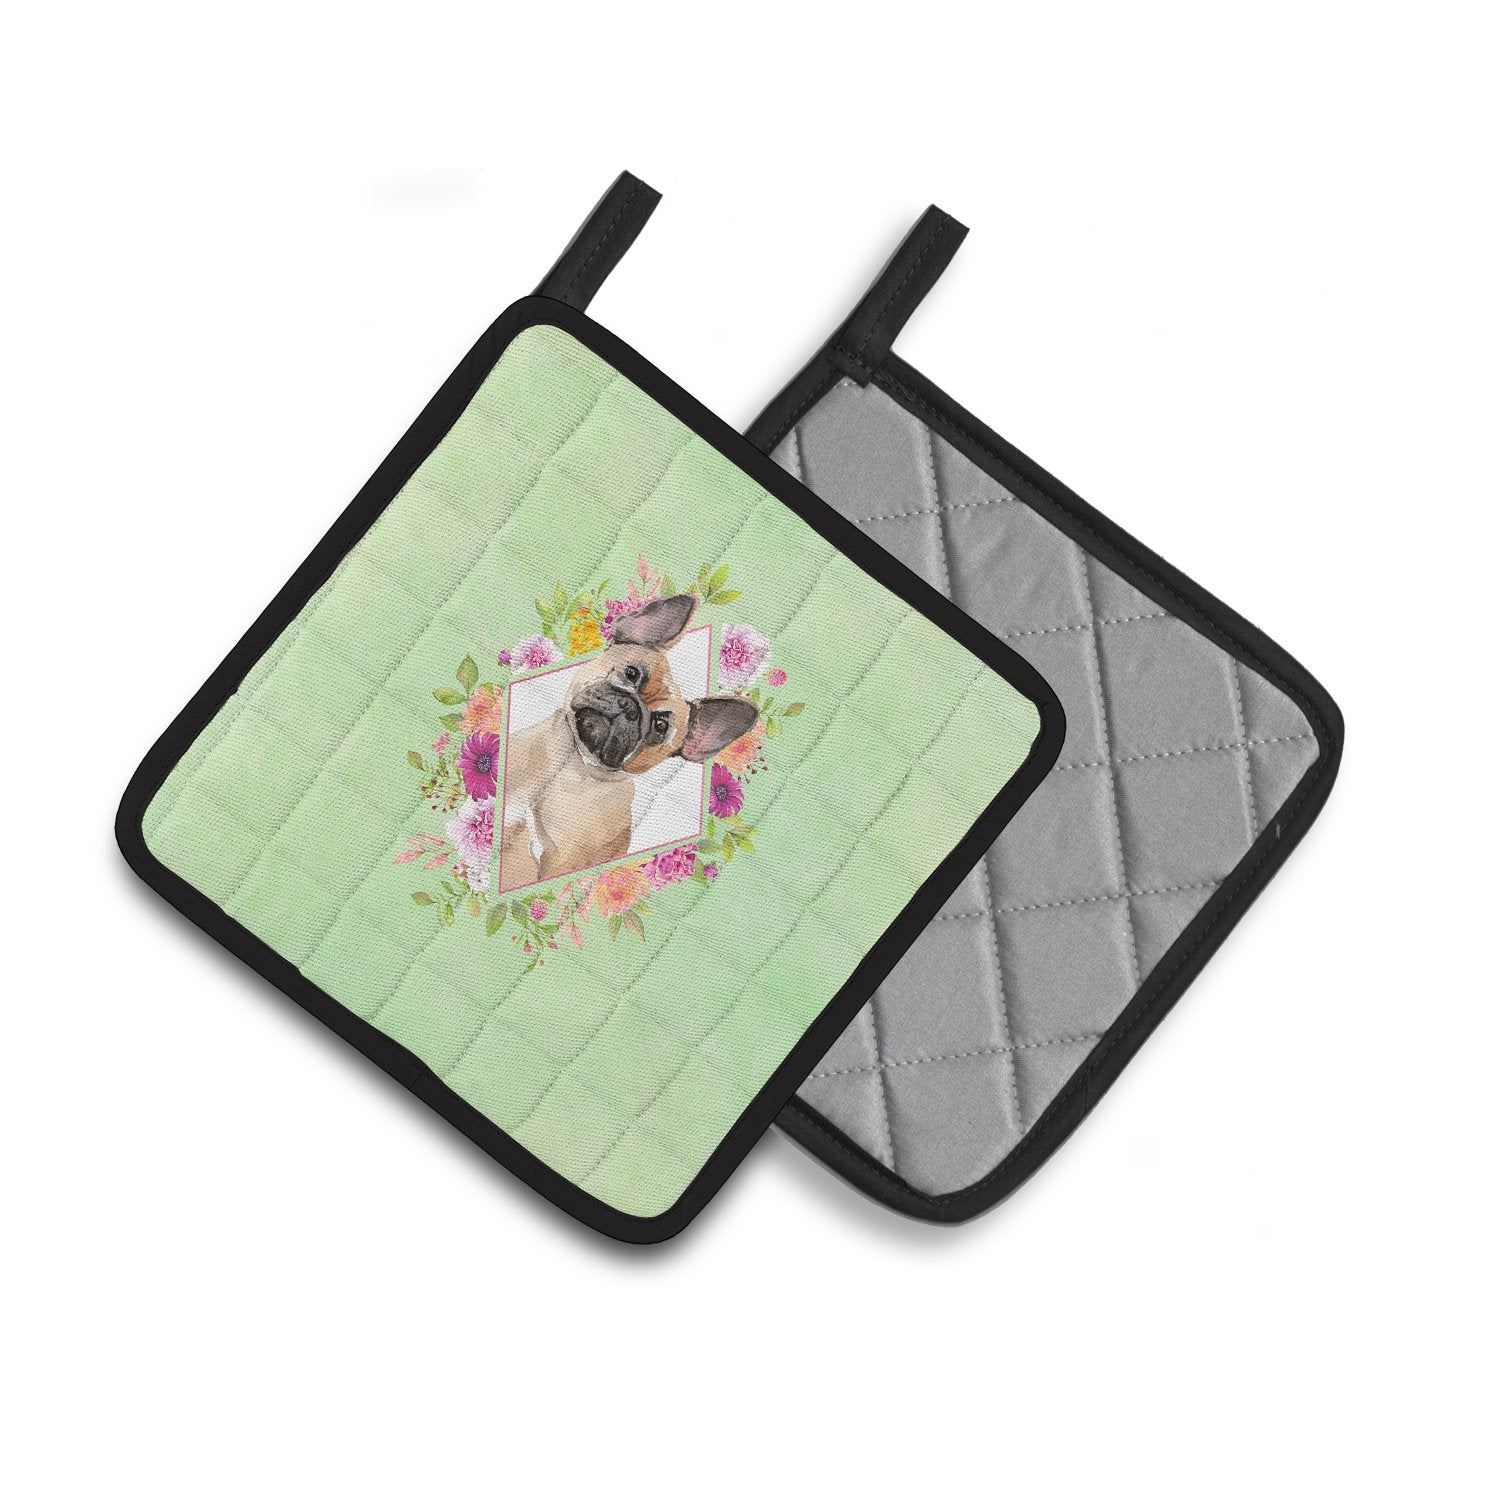 Fawn French Bulldog Green Flowers Pair of Pot Holders CK4398PTHD by Caroline's Treasures